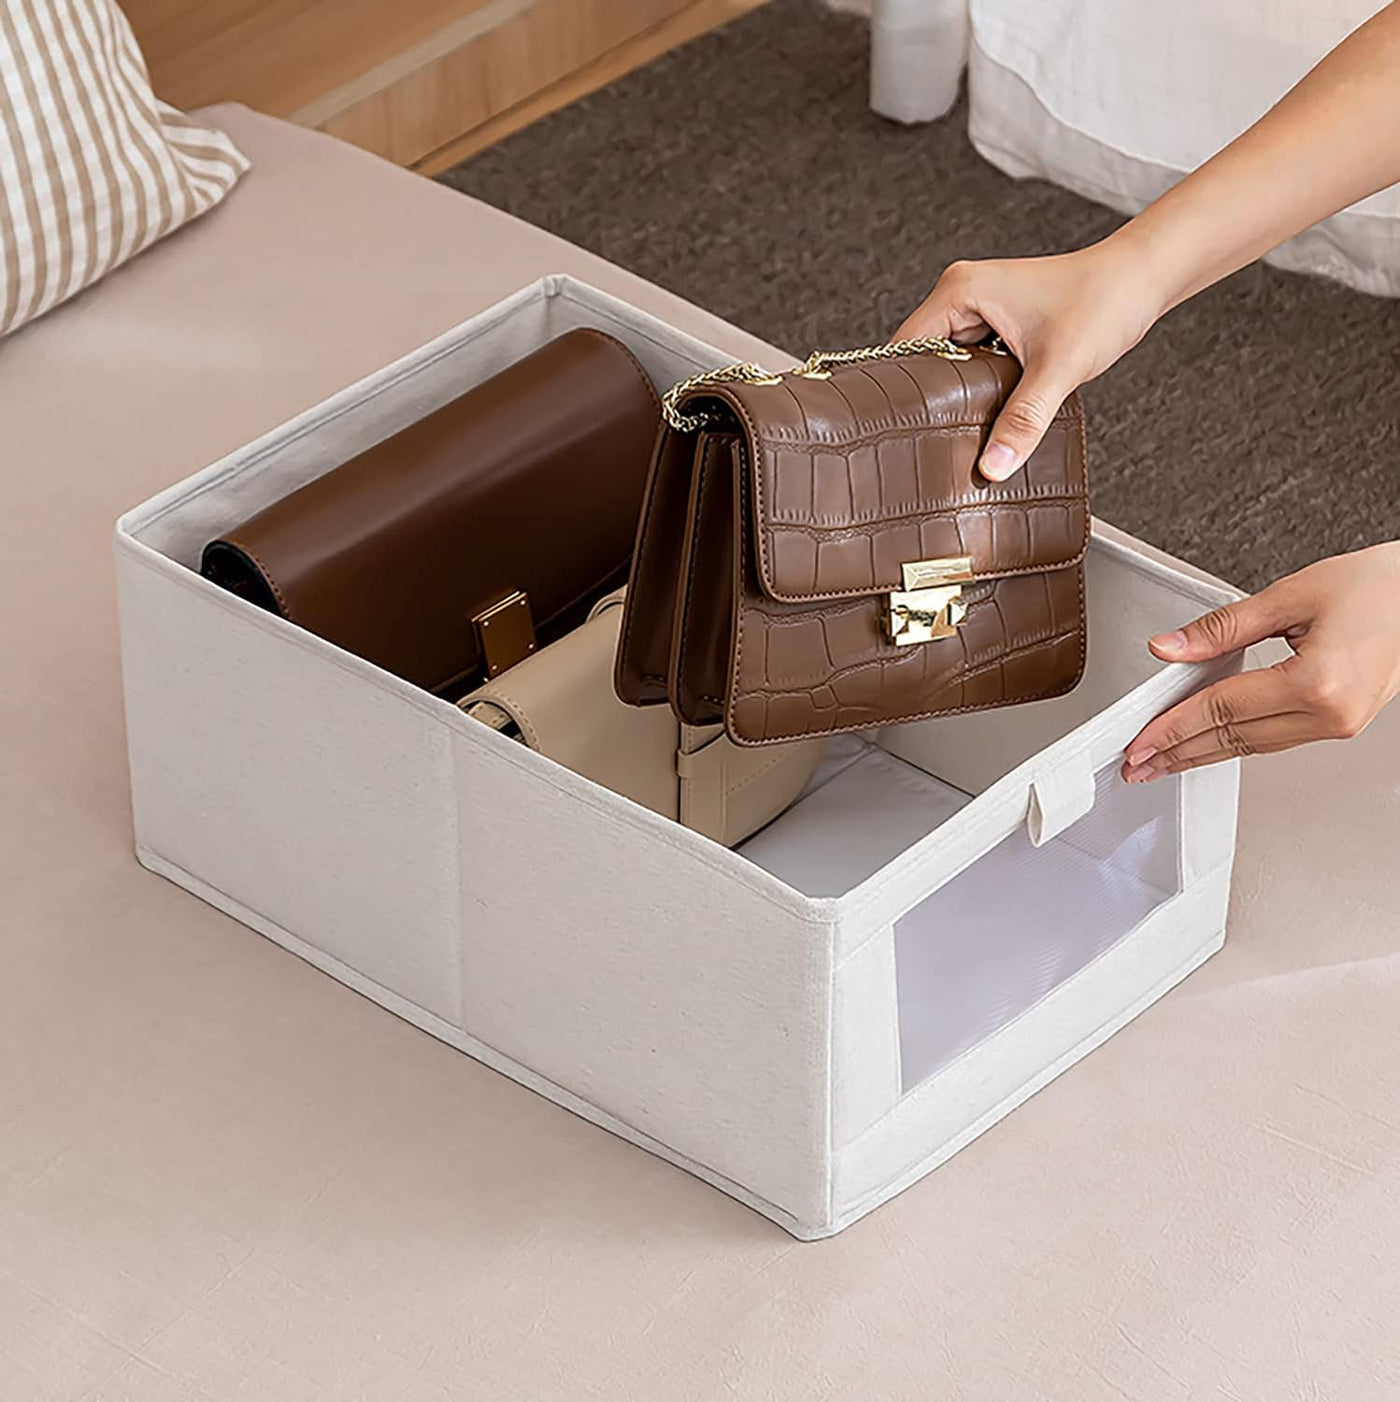 Durable and Versatile Closet Organizers and Storage Baskets Beige - (Pack of 2)